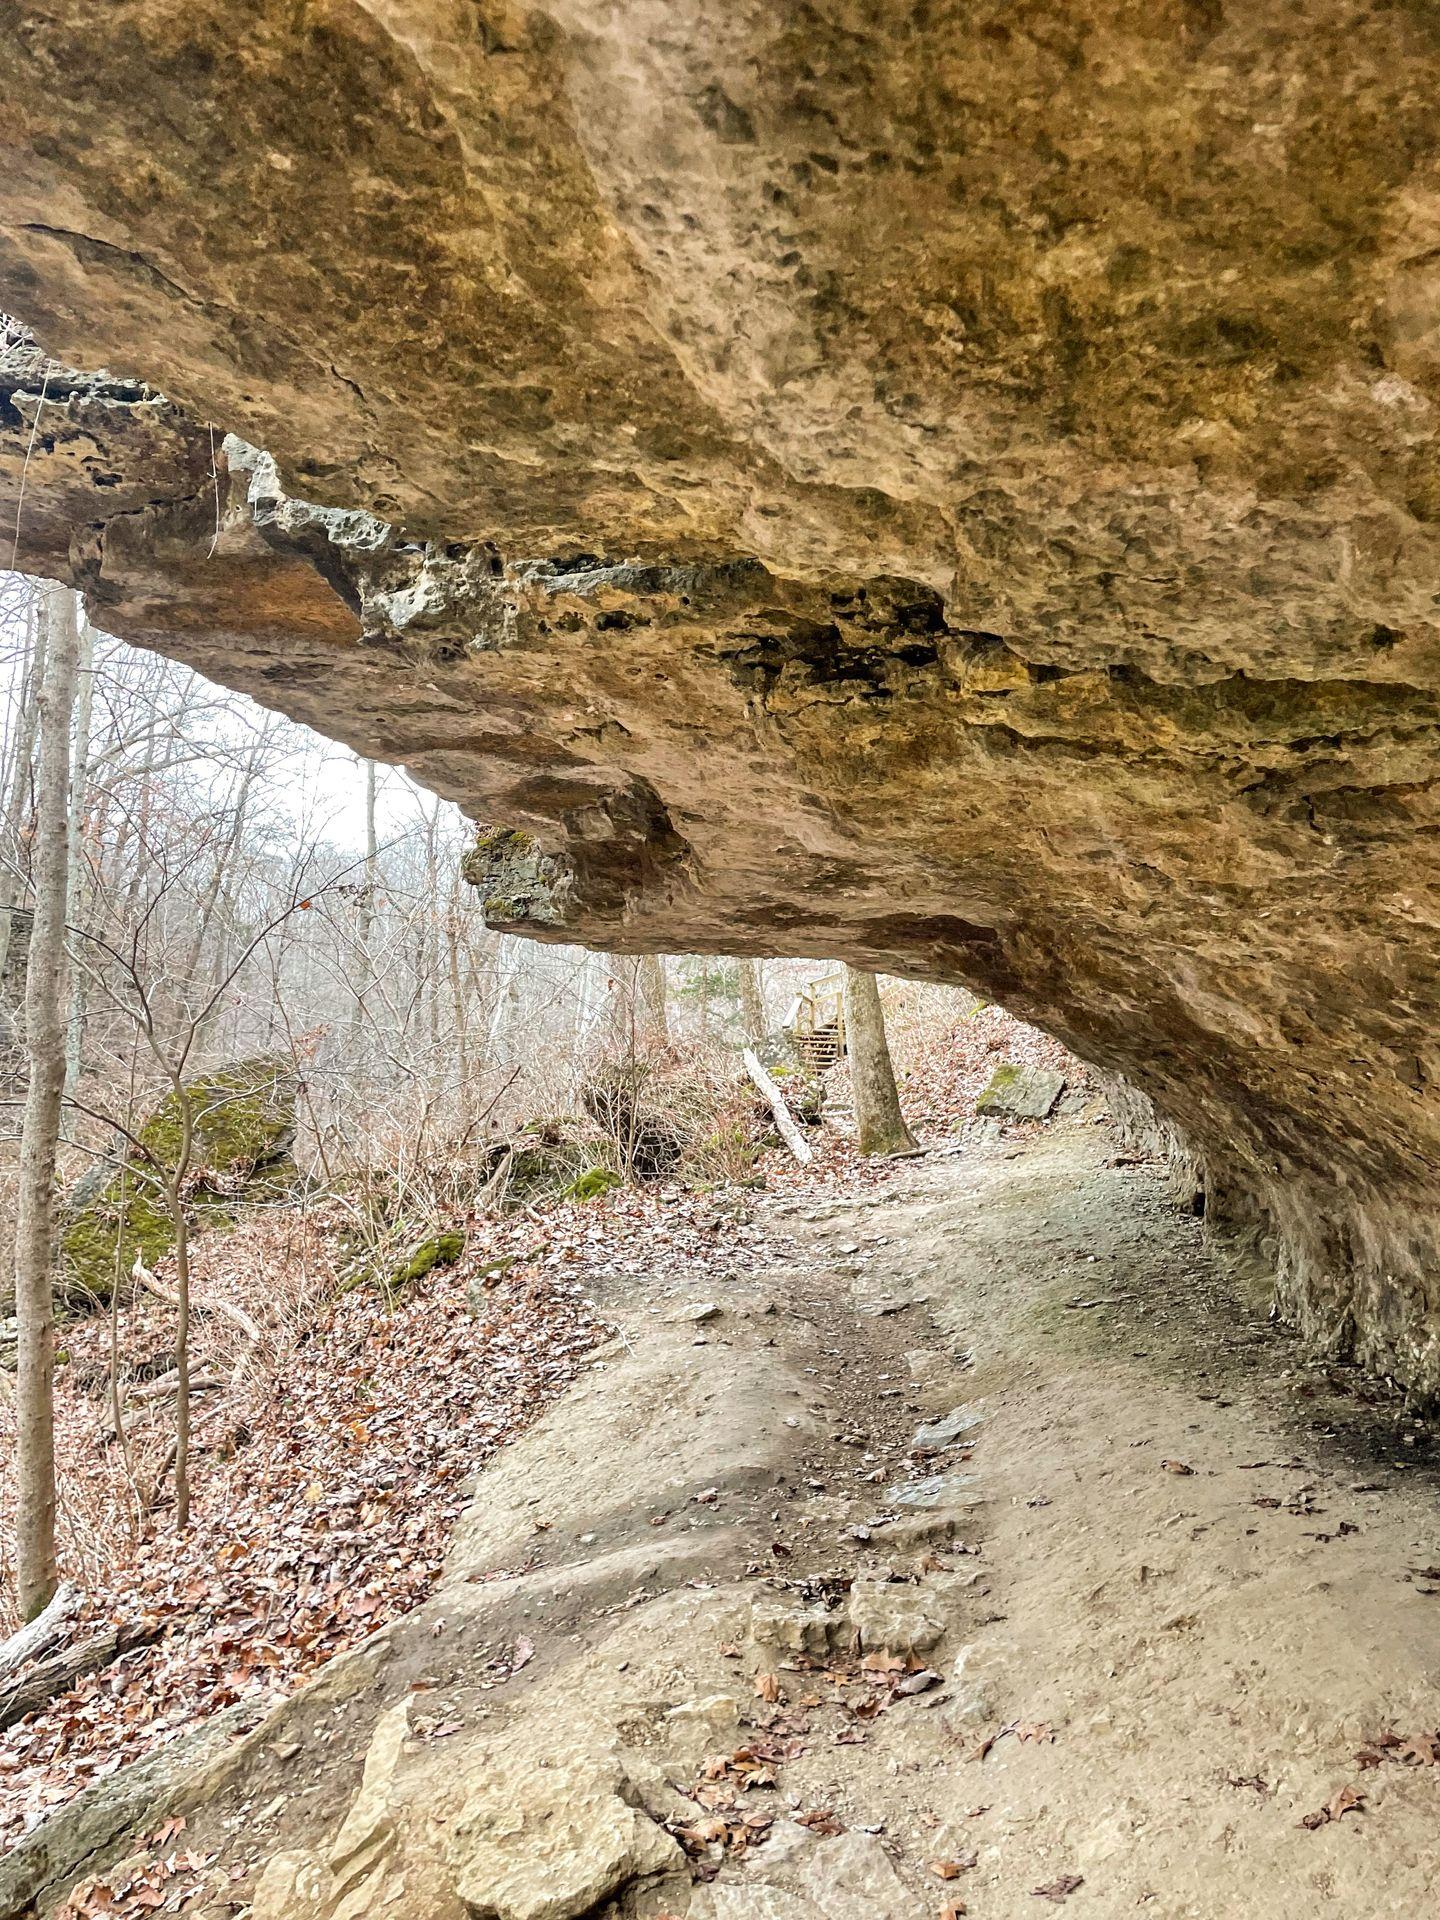 A cave overhang area on a trail in Clifty Falls.